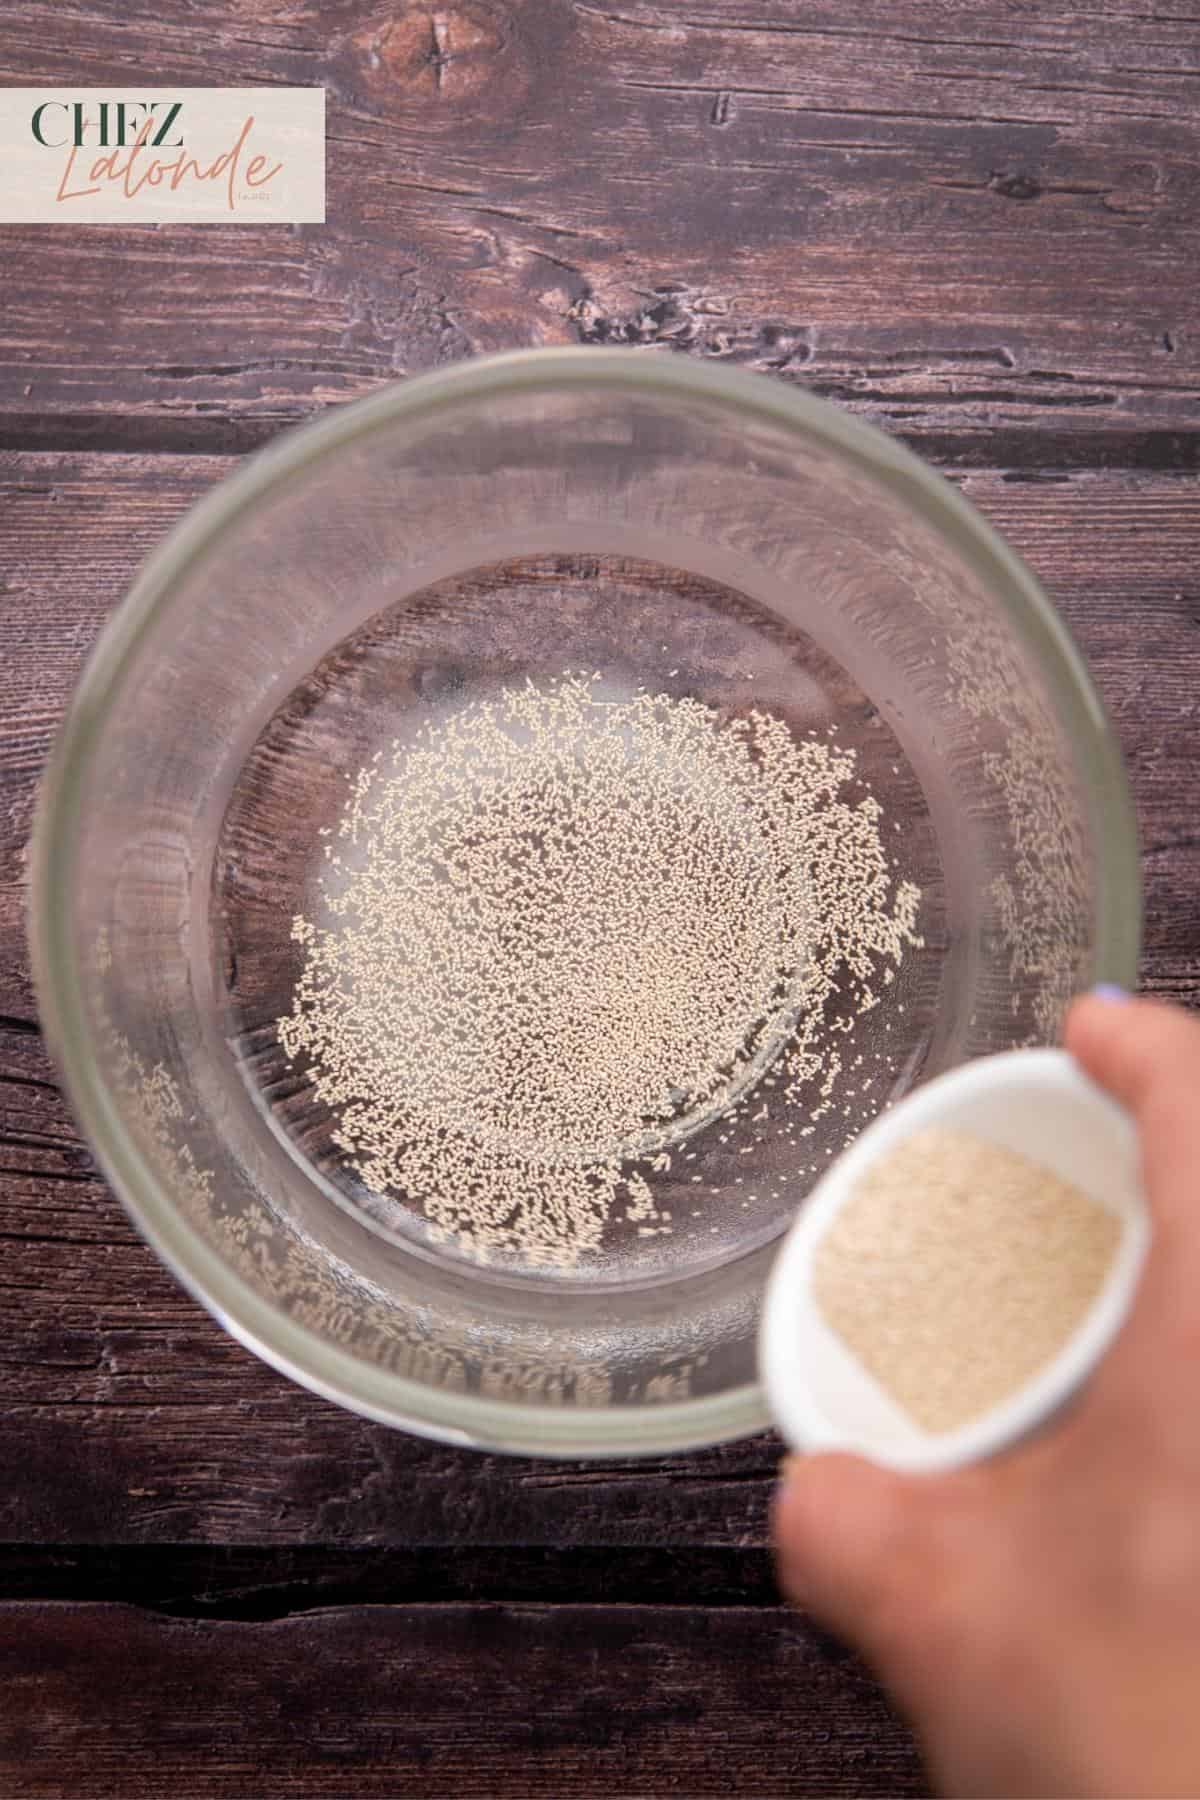 add active dry yeast into lukewarm water.